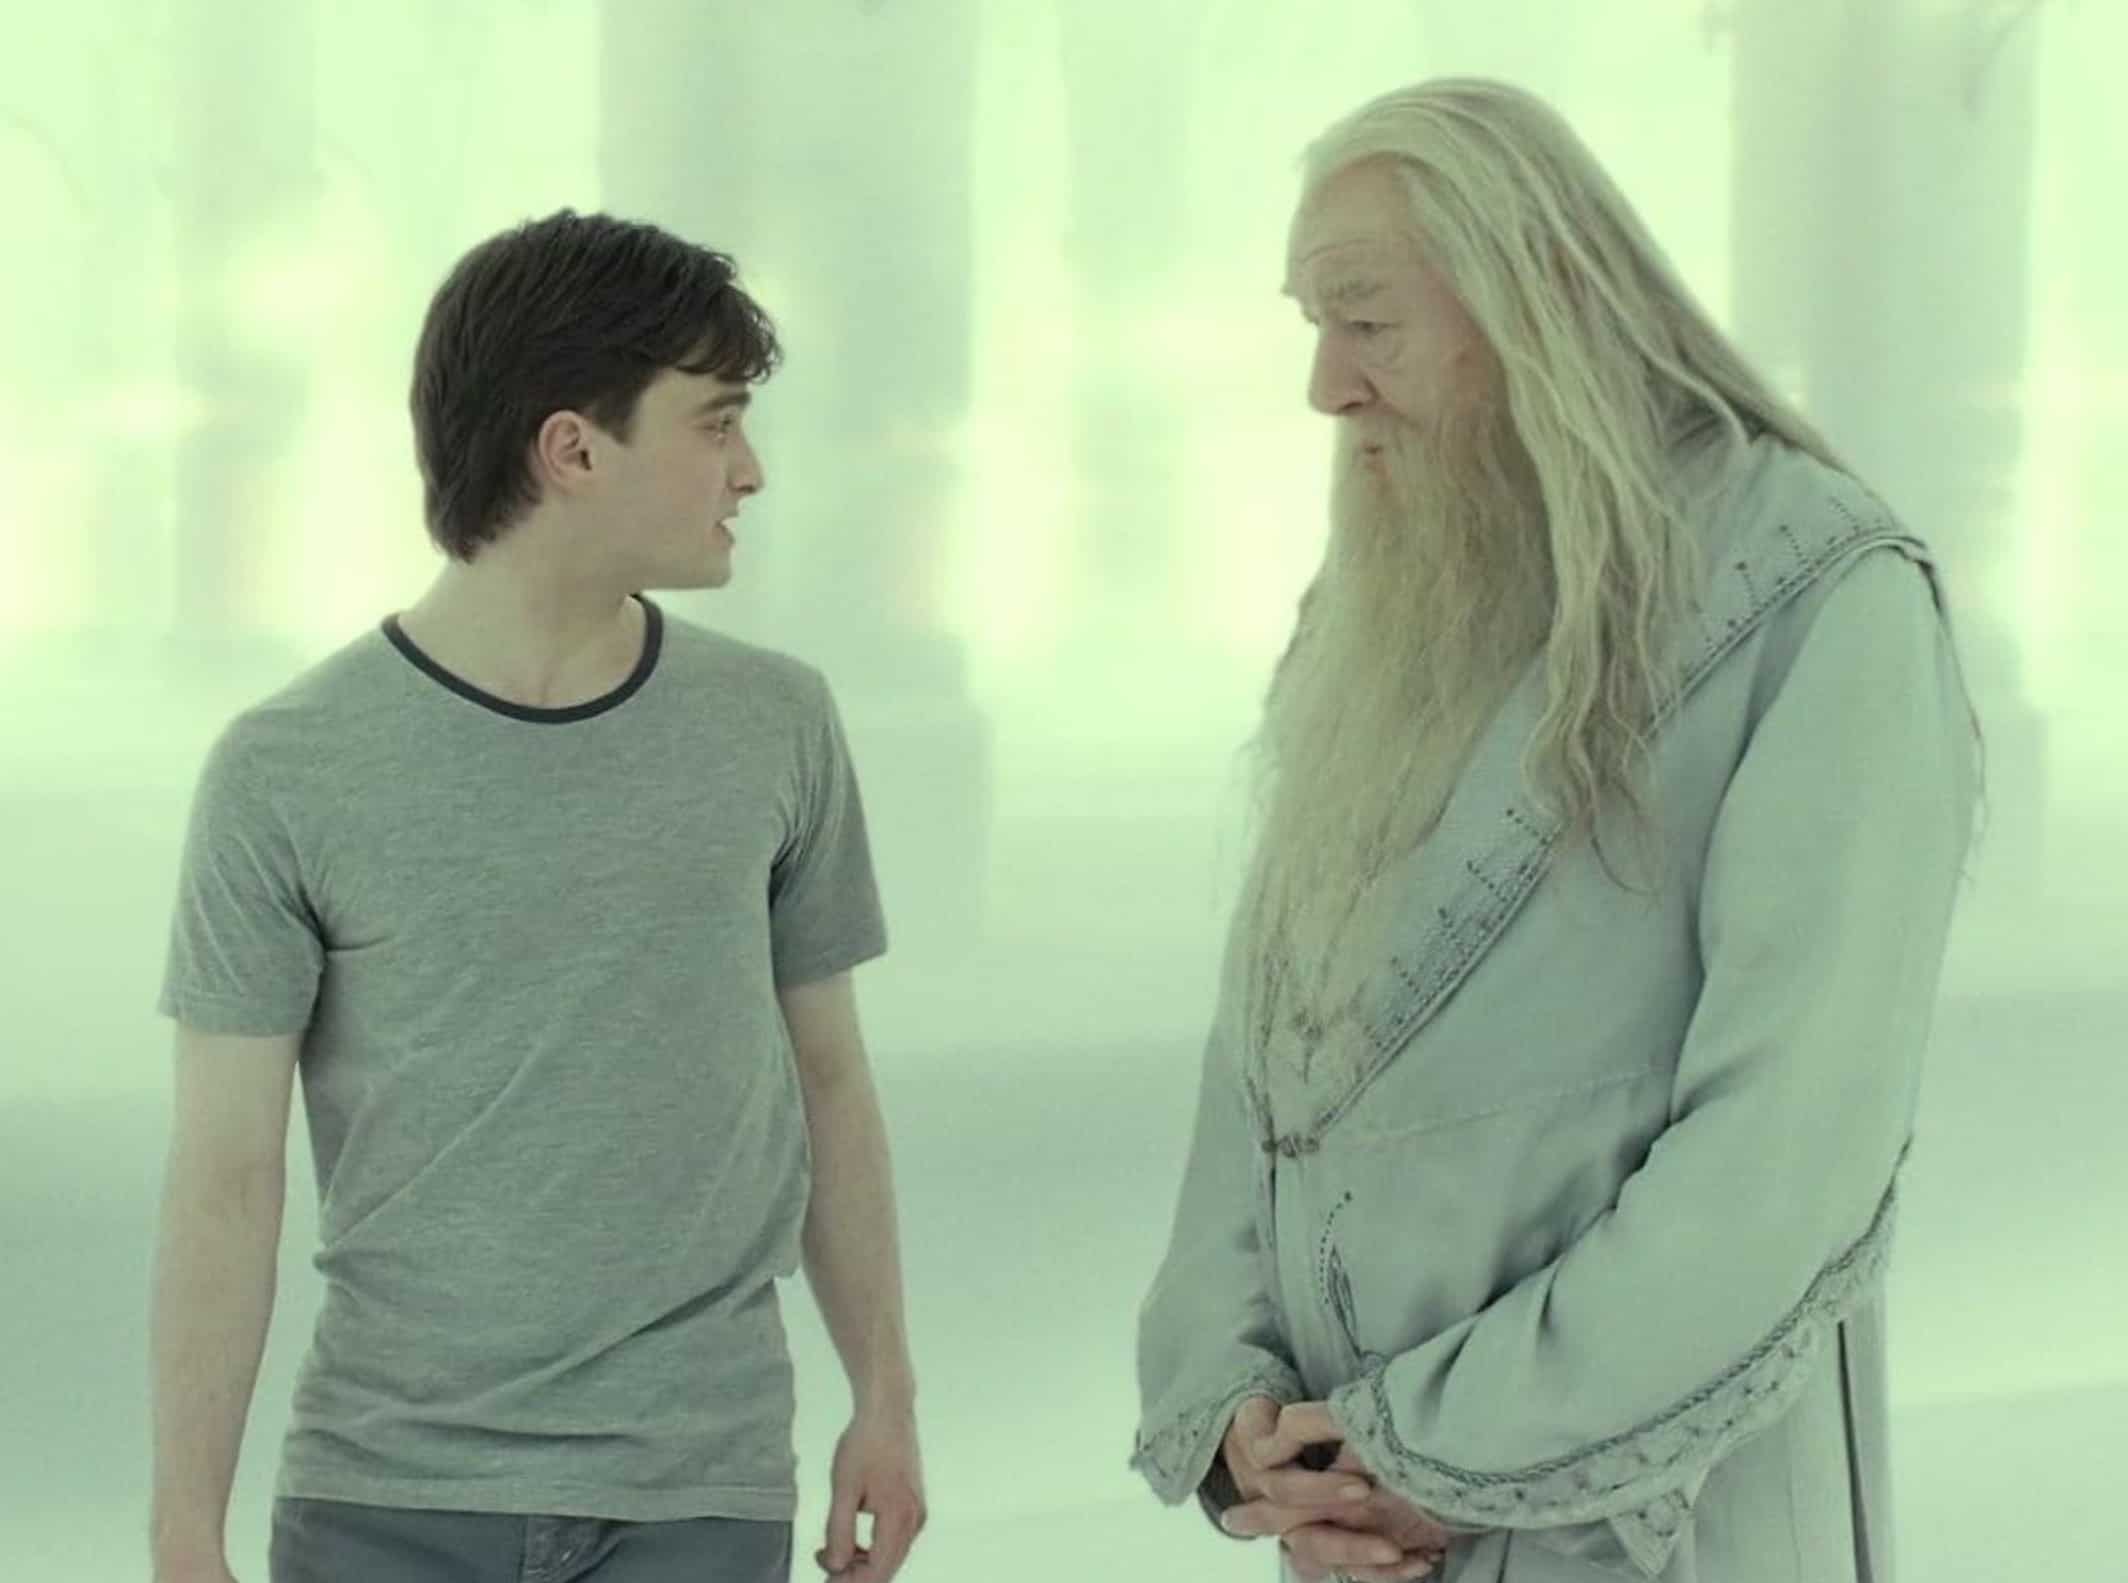 <ul> <li><strong>Who said it:</strong> Albus Dumbledore</li> <li><strong>Played by:</strong> Michael Gambon</li> <li><strong>Movie:</strong> Harry Potter and the Deathly Hallows: Part 2 (2011)</li> </ul> <p>Harry can always count on Dumbledore to share the wisdom he needs at any given moment. When Harry starts to pity Voldemort, this quote is Dumbledore's response to him. Love is a recurring theme throughout the series and this quote reinforces the idea that life is not worth living without love.</p>